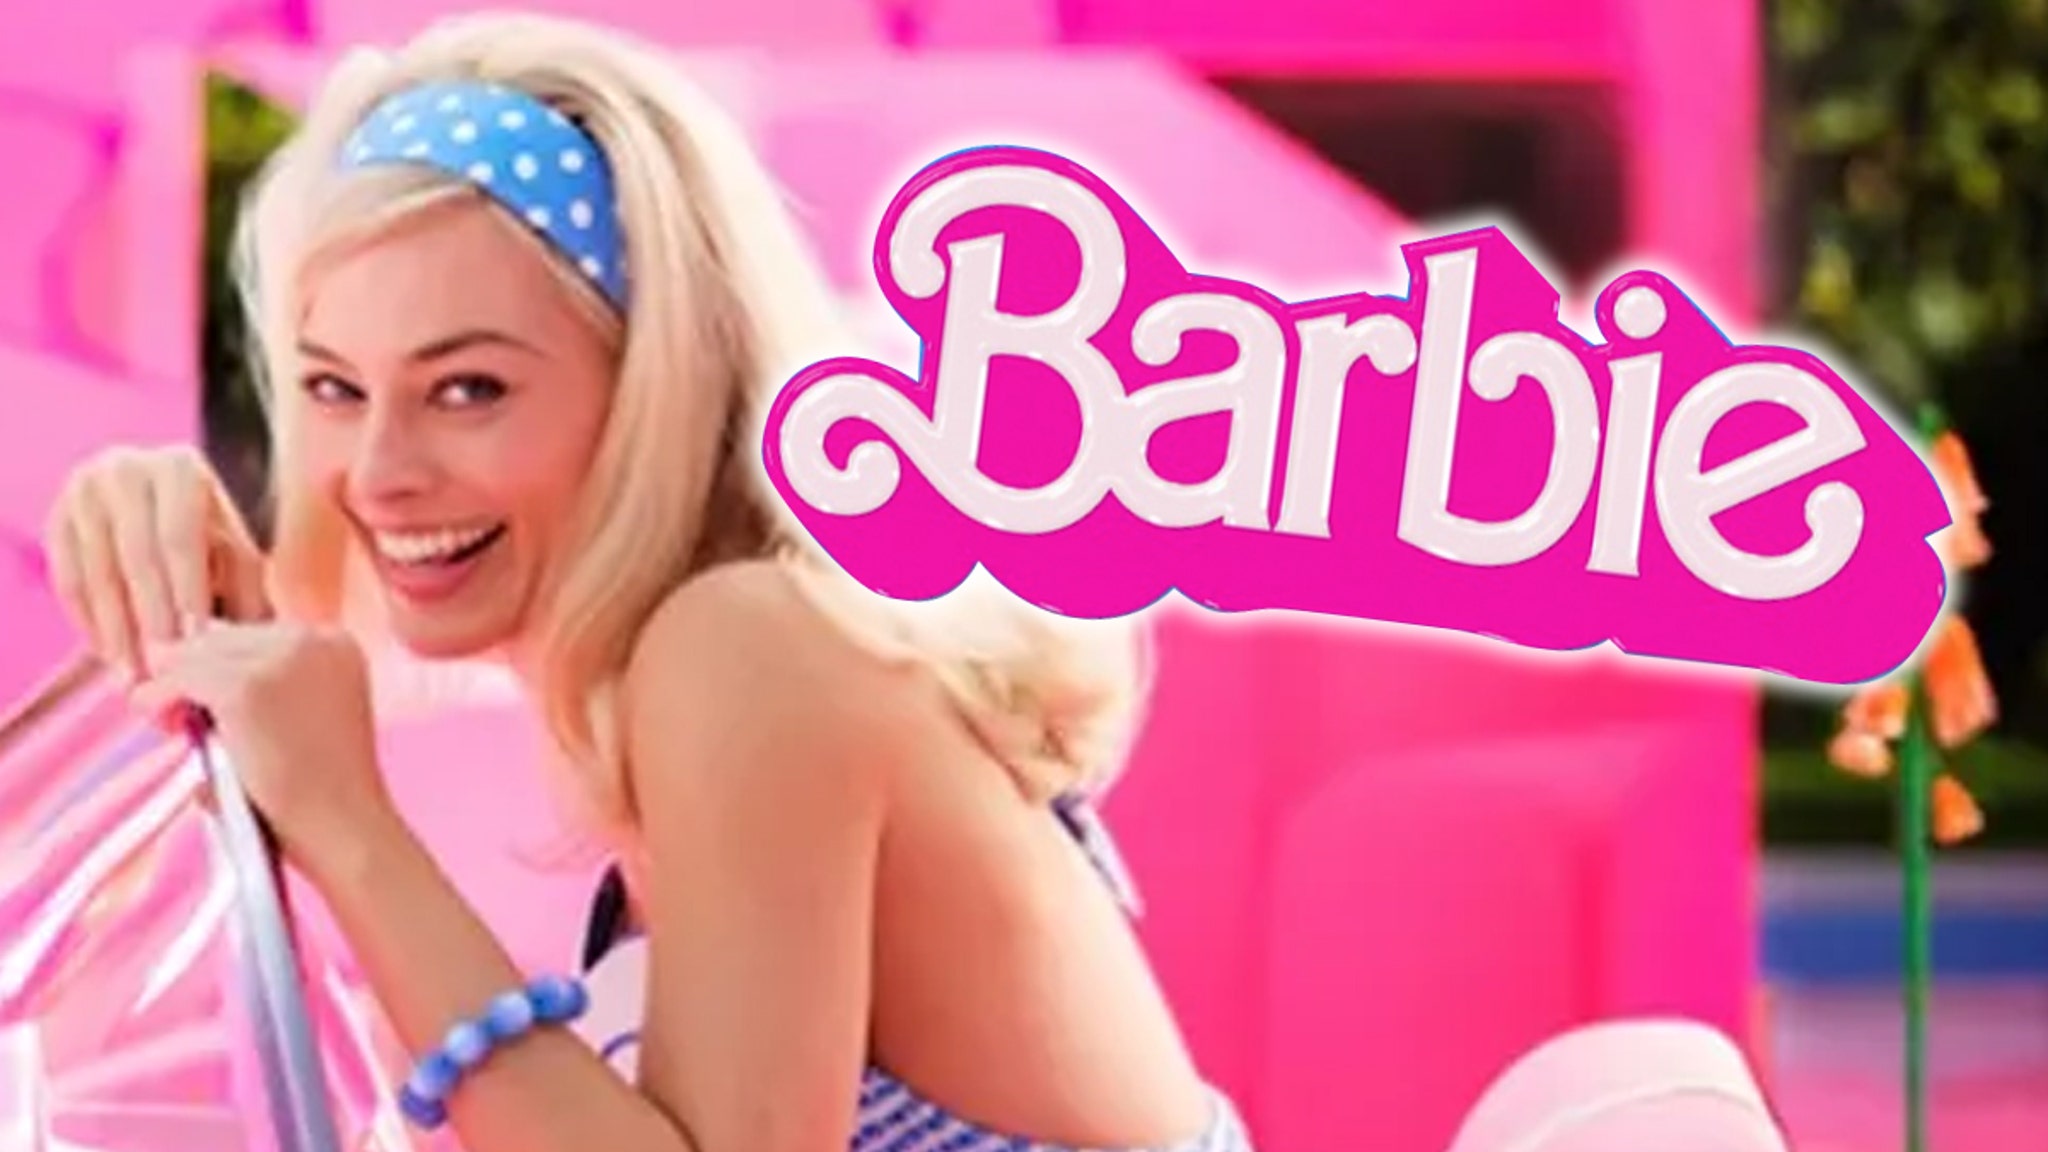 Woman Who Inspired Barbie Doll Gives Margot Robbie’s Movie Character Thumbs-Up